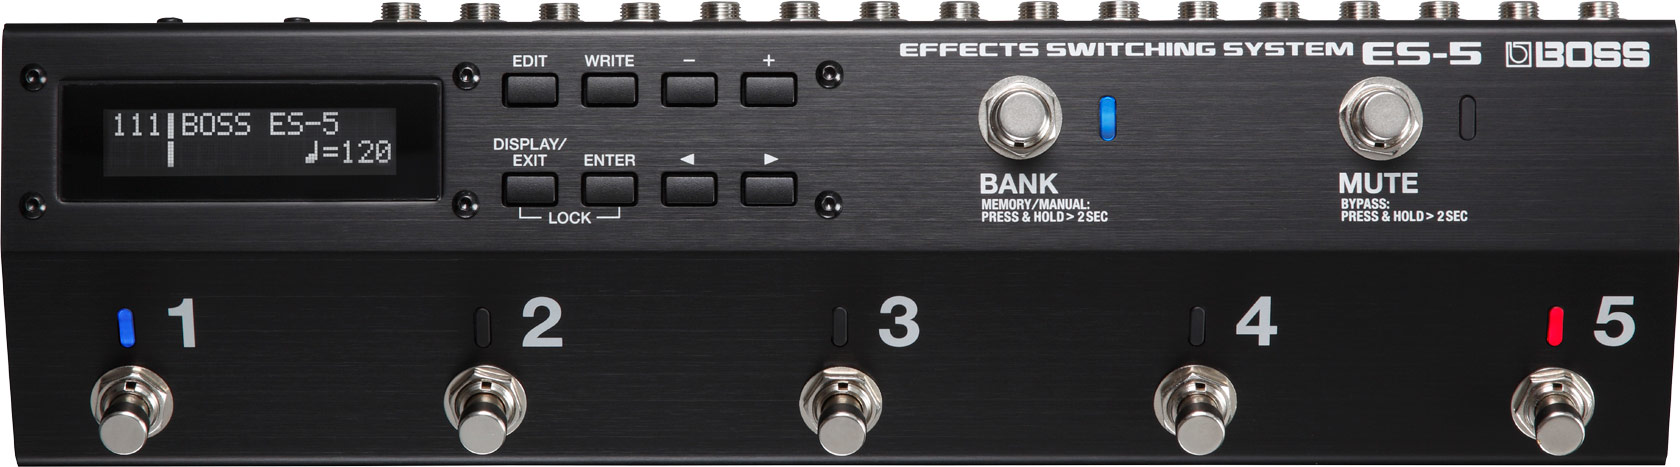 ES-5 | Effects Switching System - BOSS